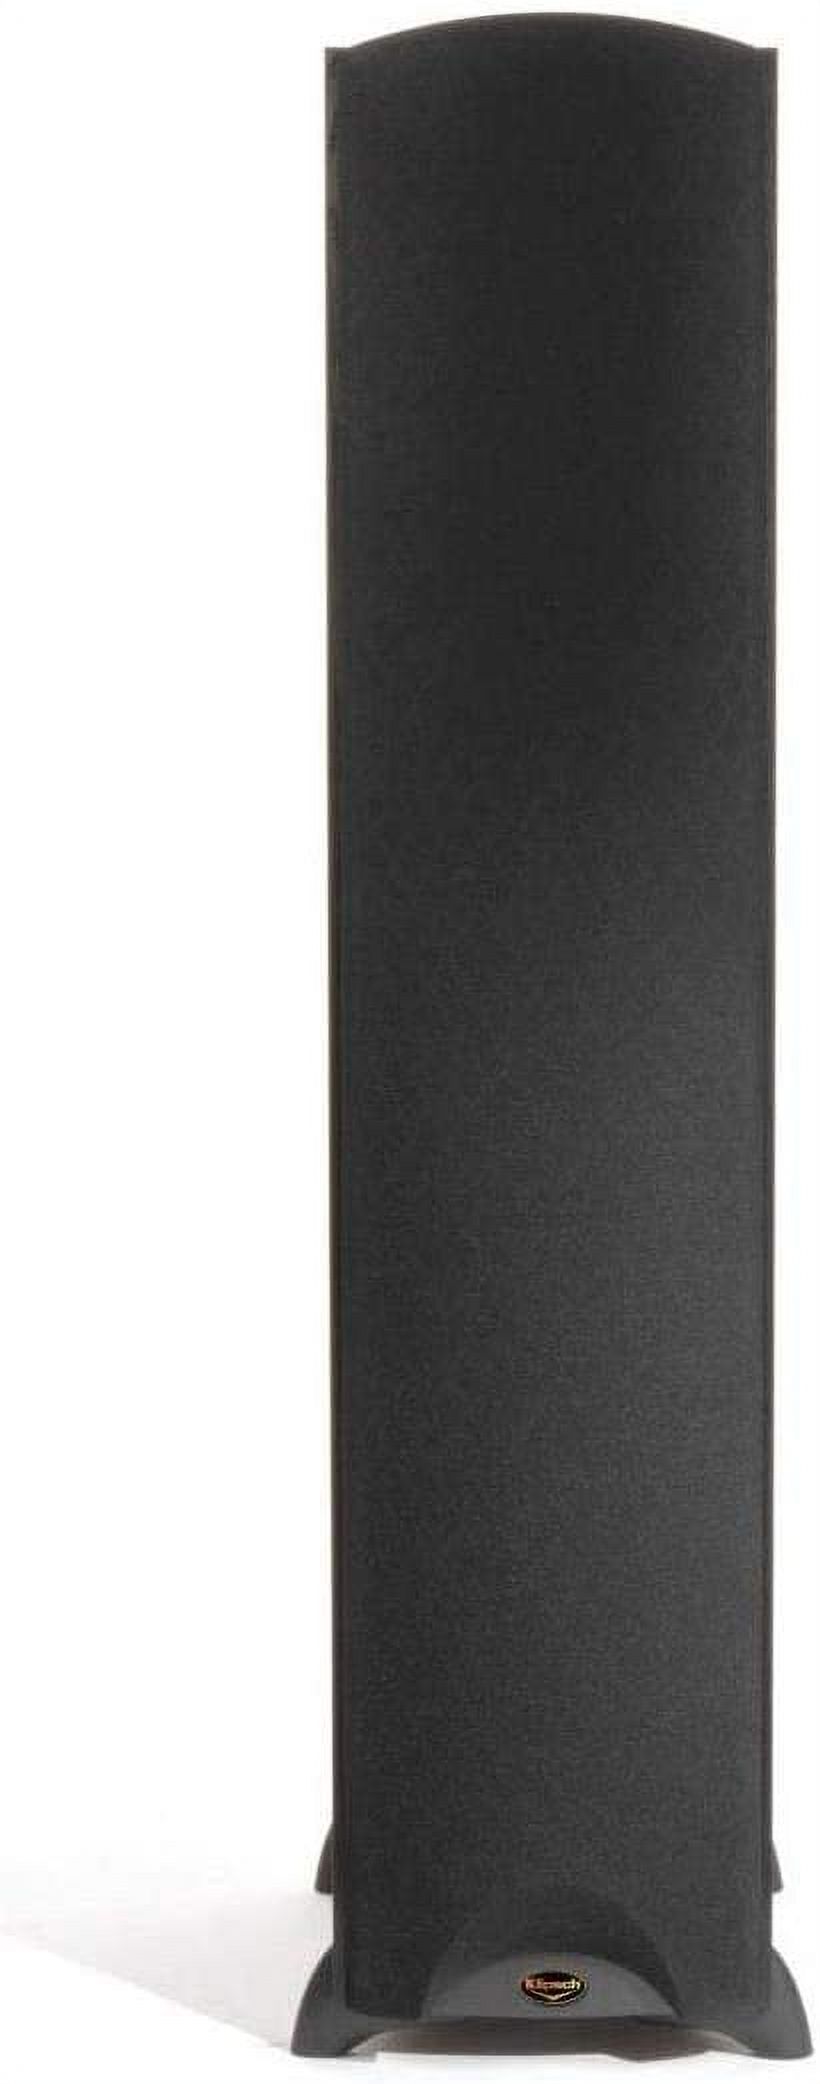 Klipsch Synergy Black Label F-300 Floorstanding Speaker with Dual 8" Woofers, Pair - image 3 of 5